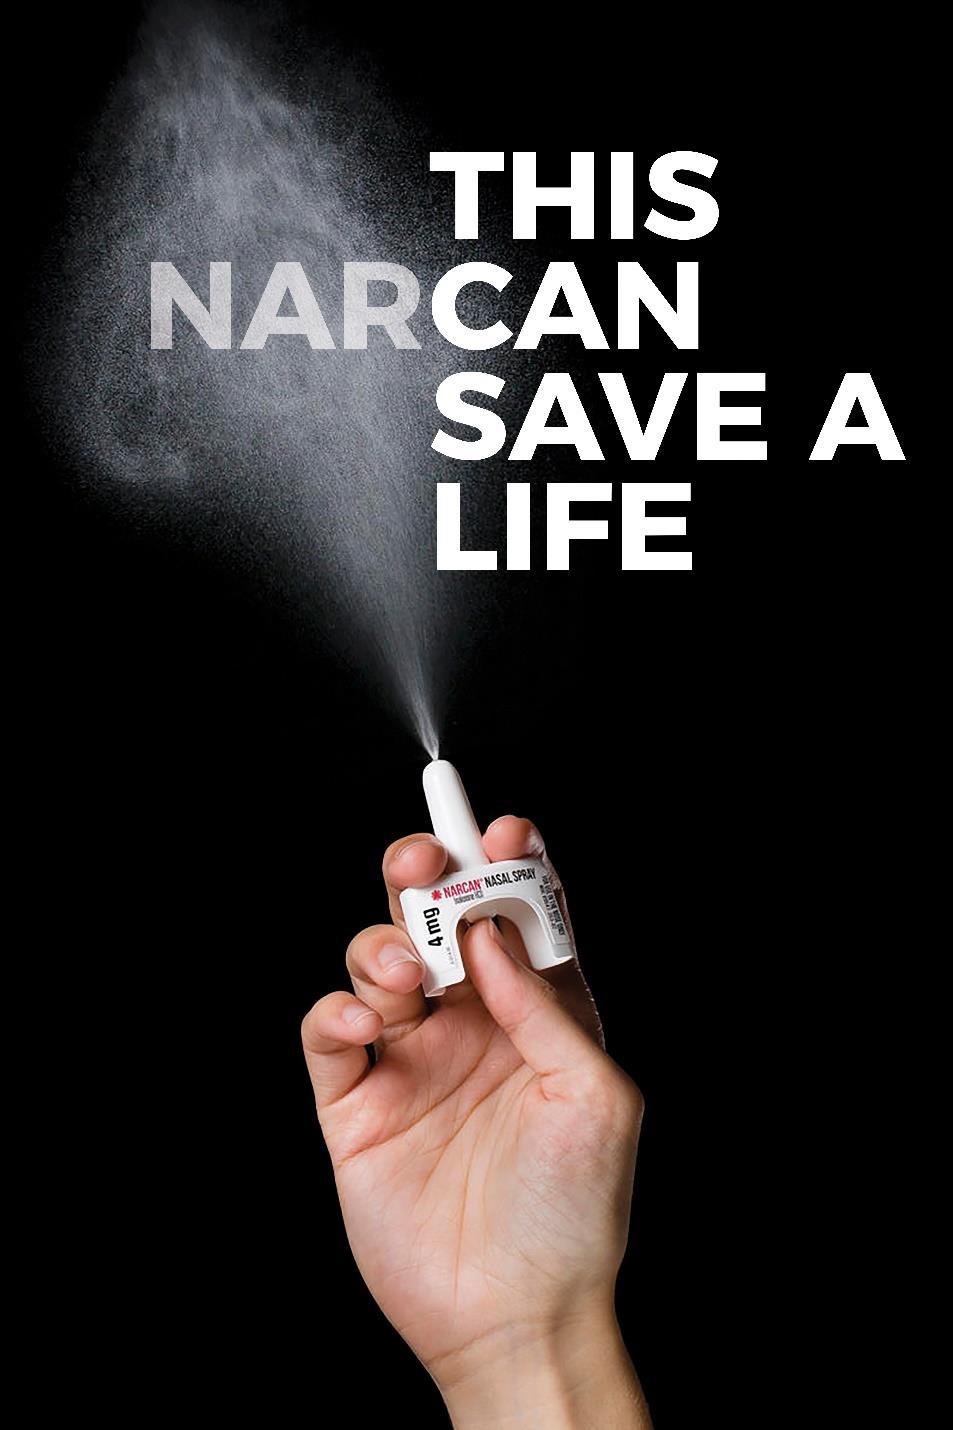 Using community reinvestment funds in 2016, Vaya was the first in the country to purchase a large quantity of NARCAN nasal spray for distribution 127 confirmed overdose reversals With the assistance